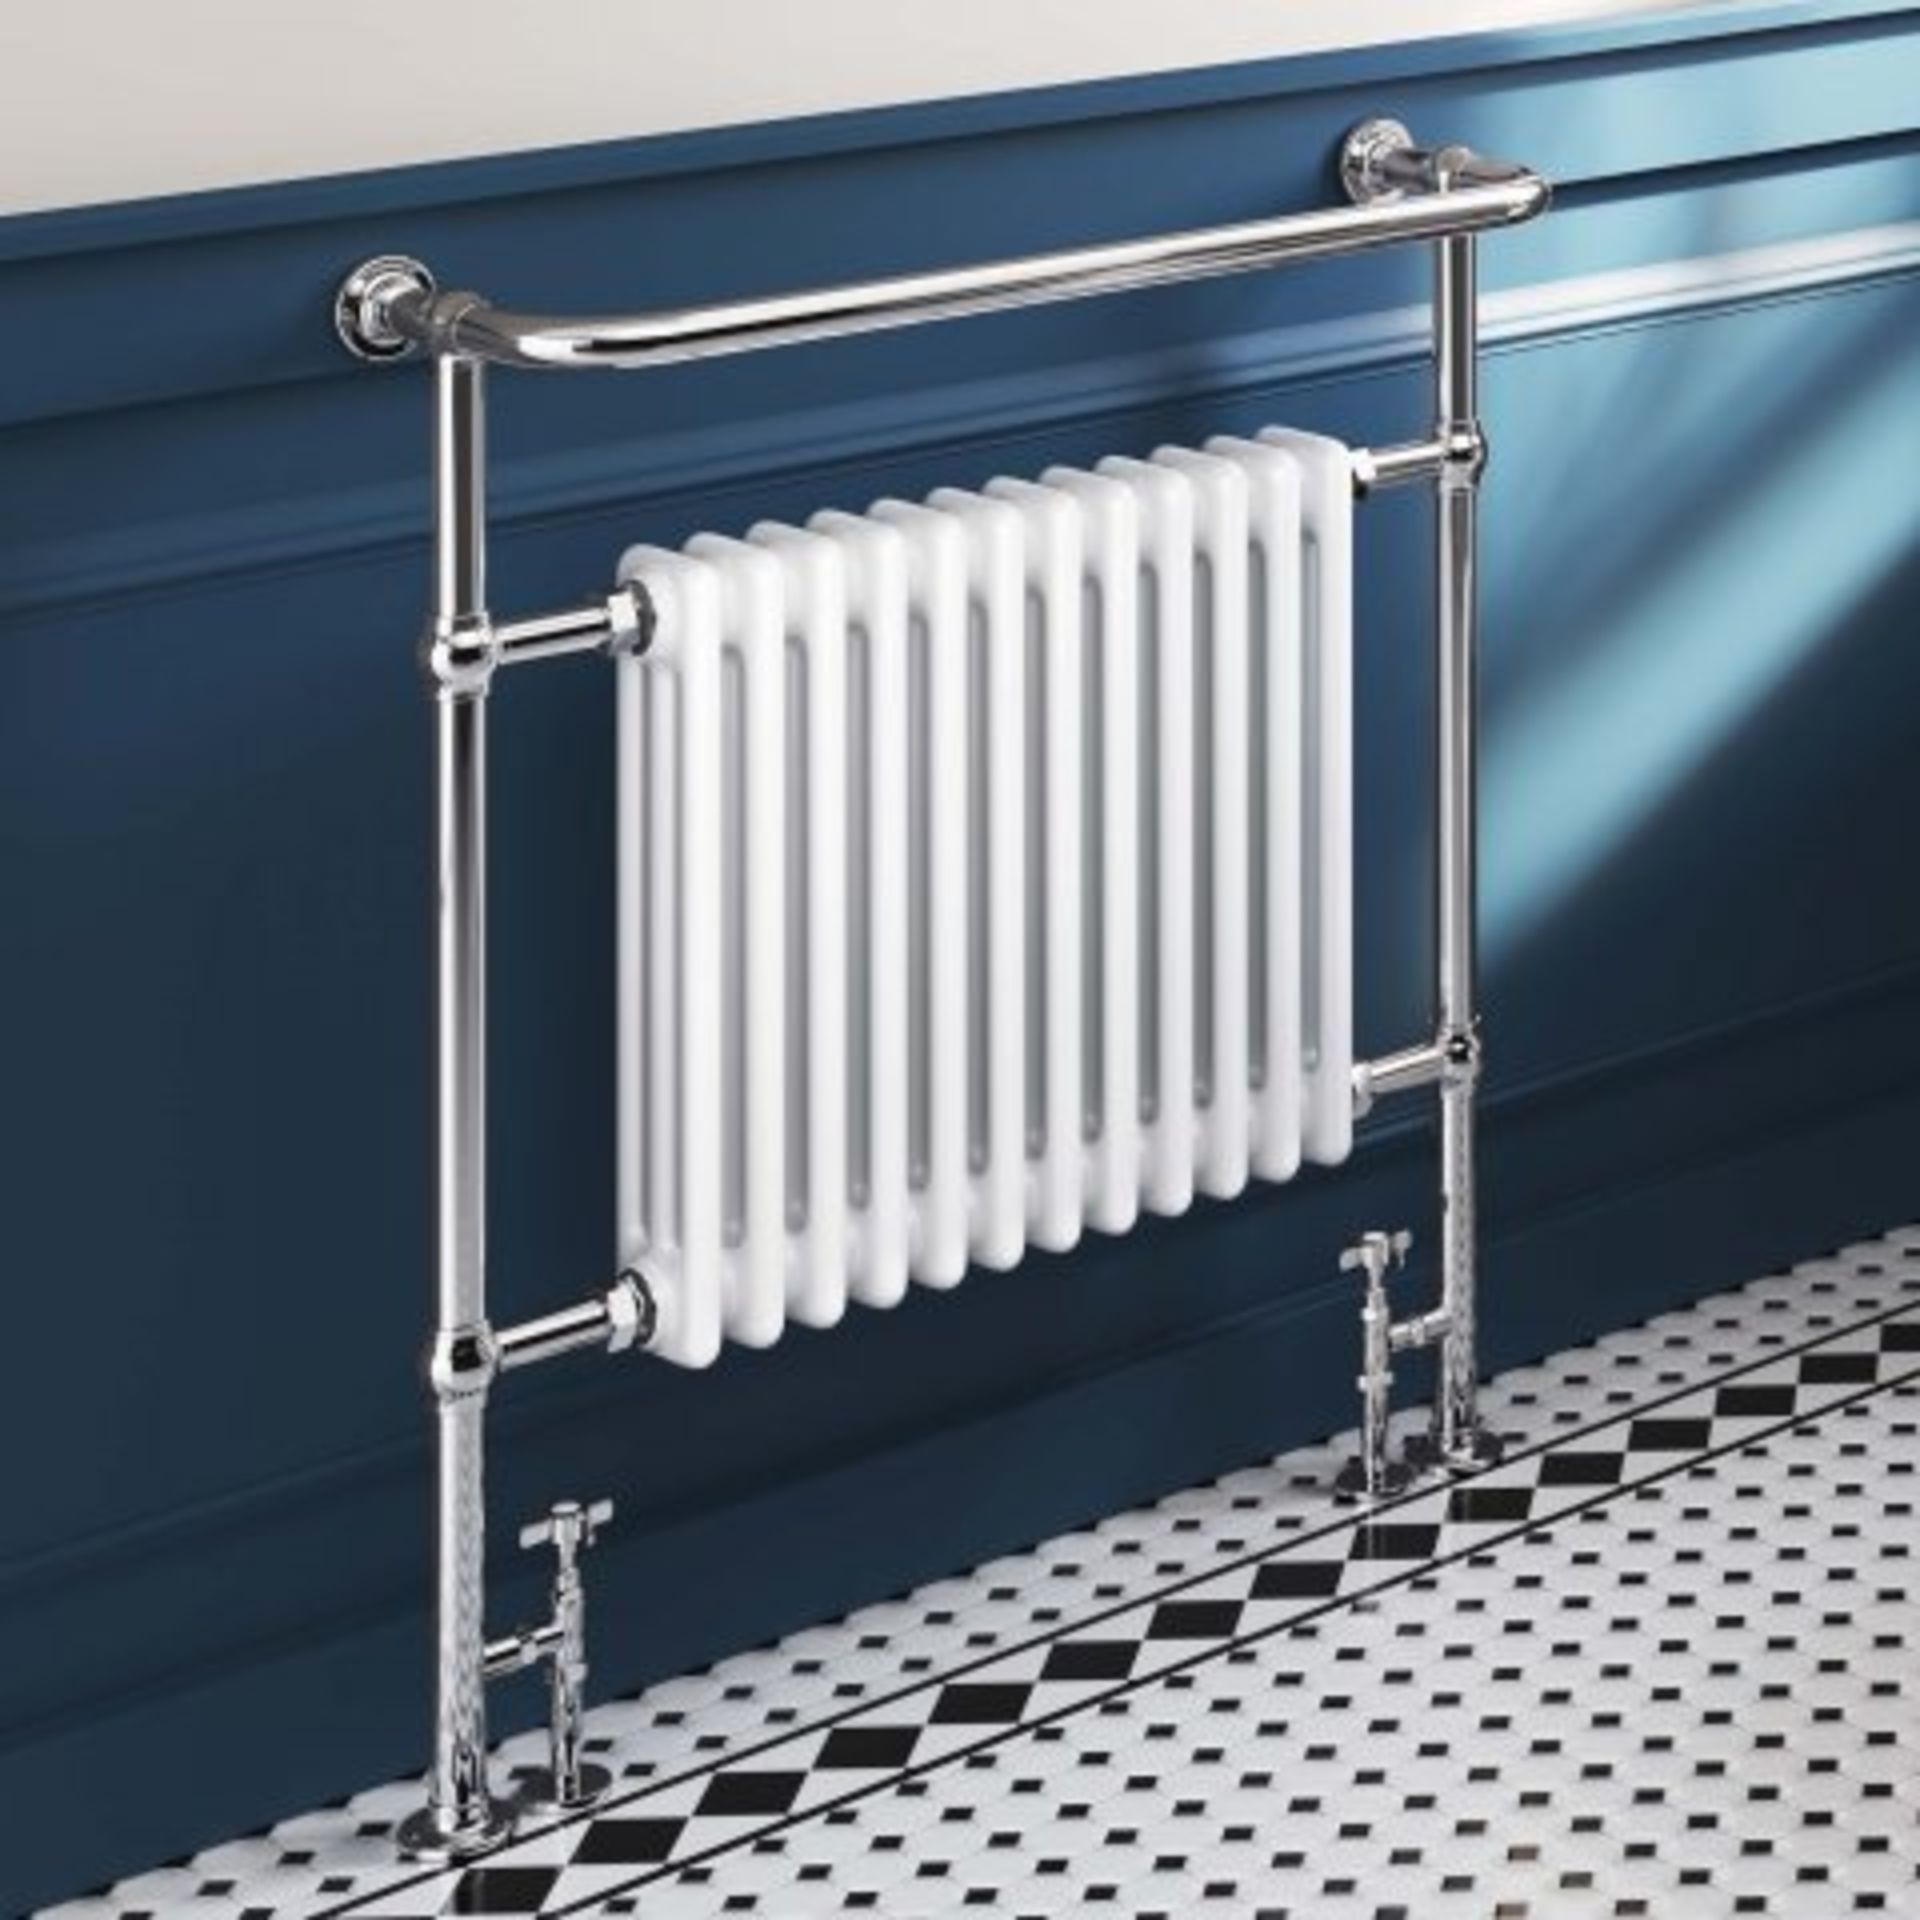 (A503) 952x659mm Large Traditional White Towel Rail Radiator - Victoria Premium. RRP £341.99. Long